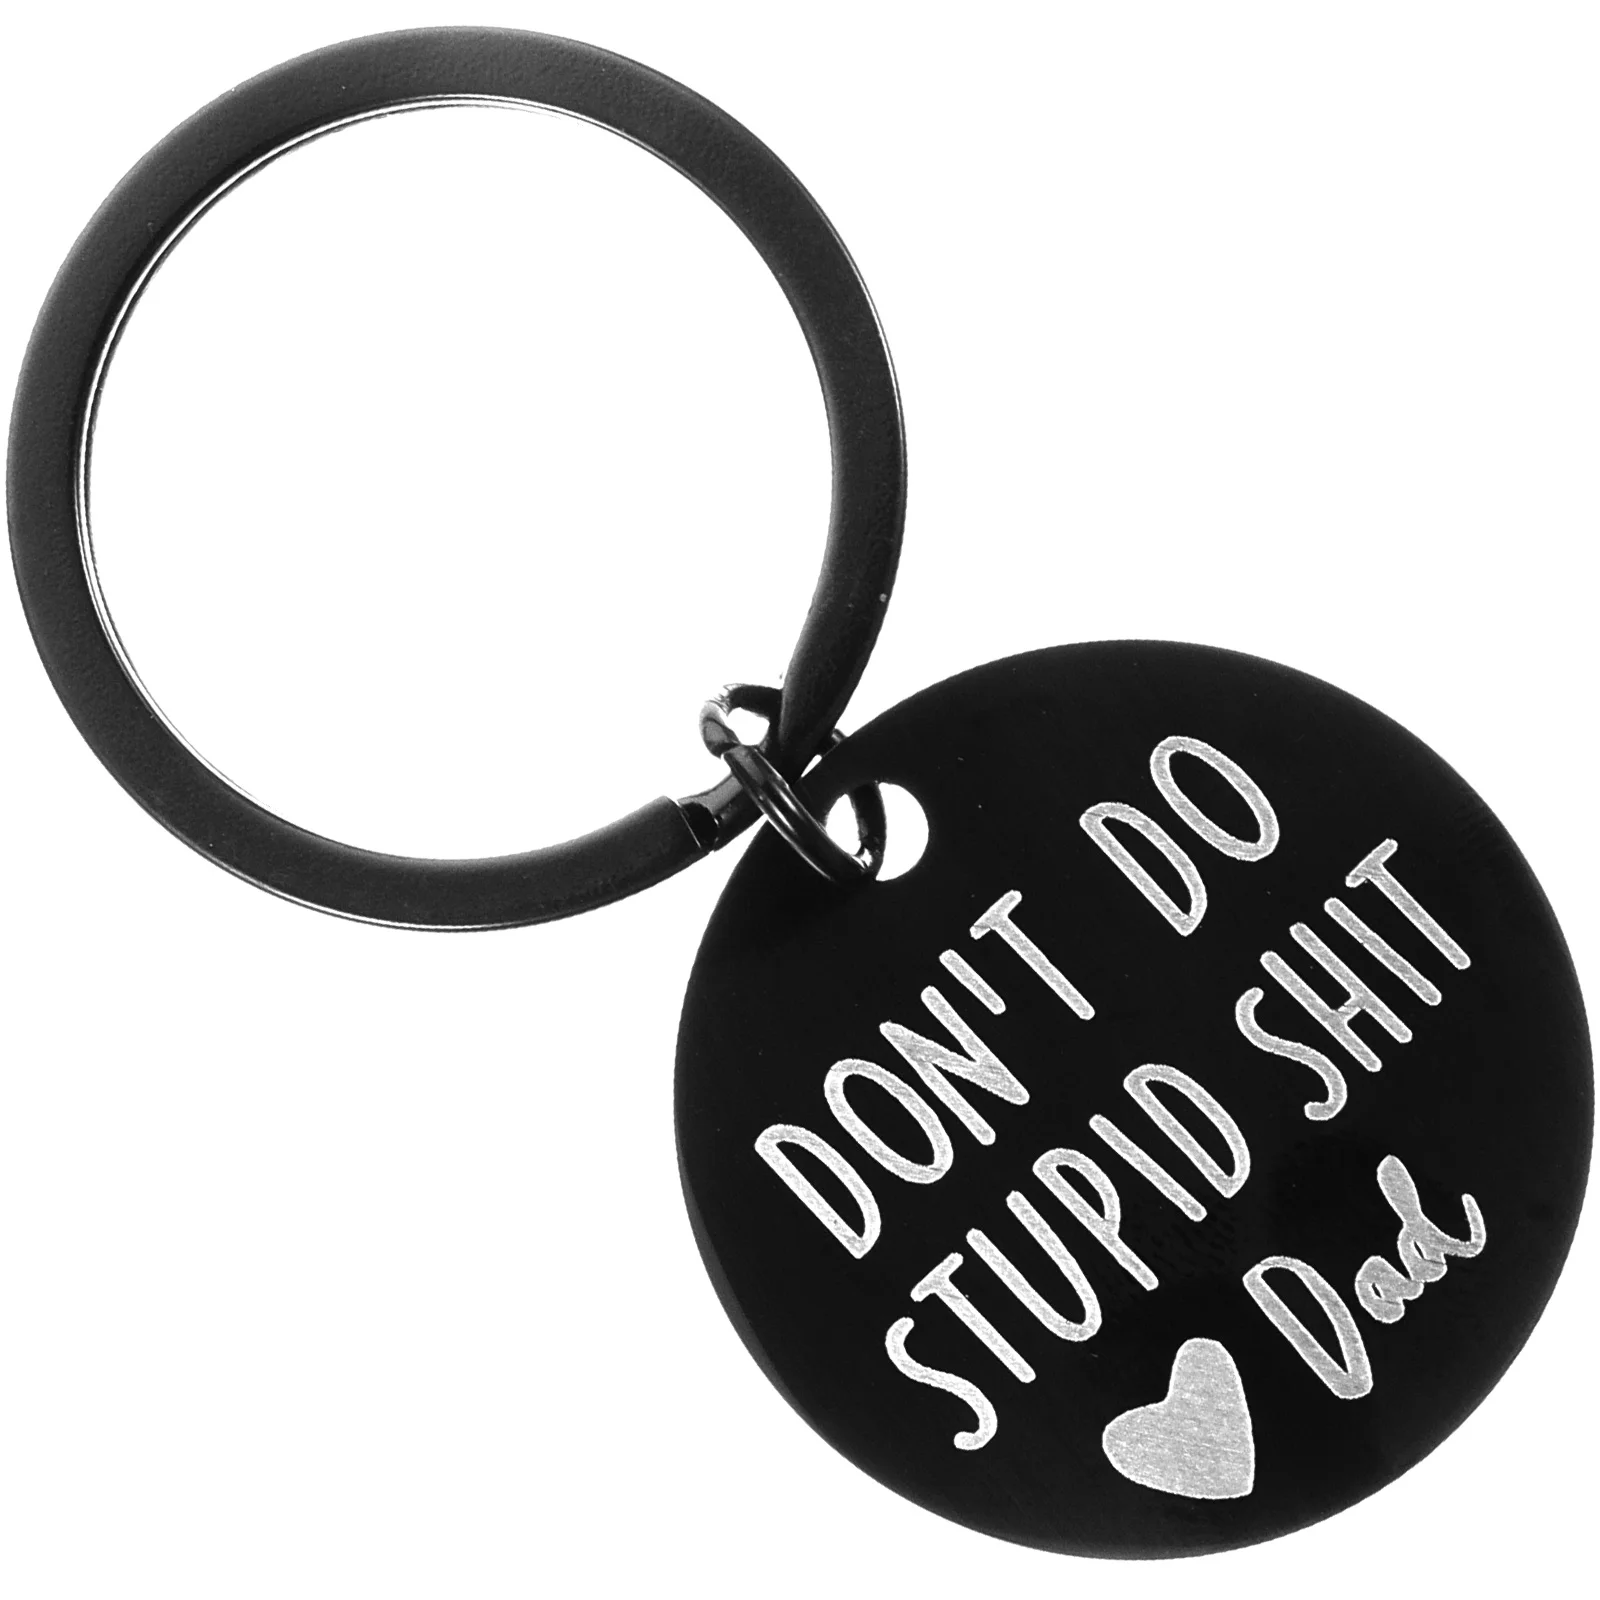 

Keychain Father Day S Dad Gifts Jewelry Keyring Love Birthday Gift Ring Key School Don Fathers Present Handbag Meaningful Stupid